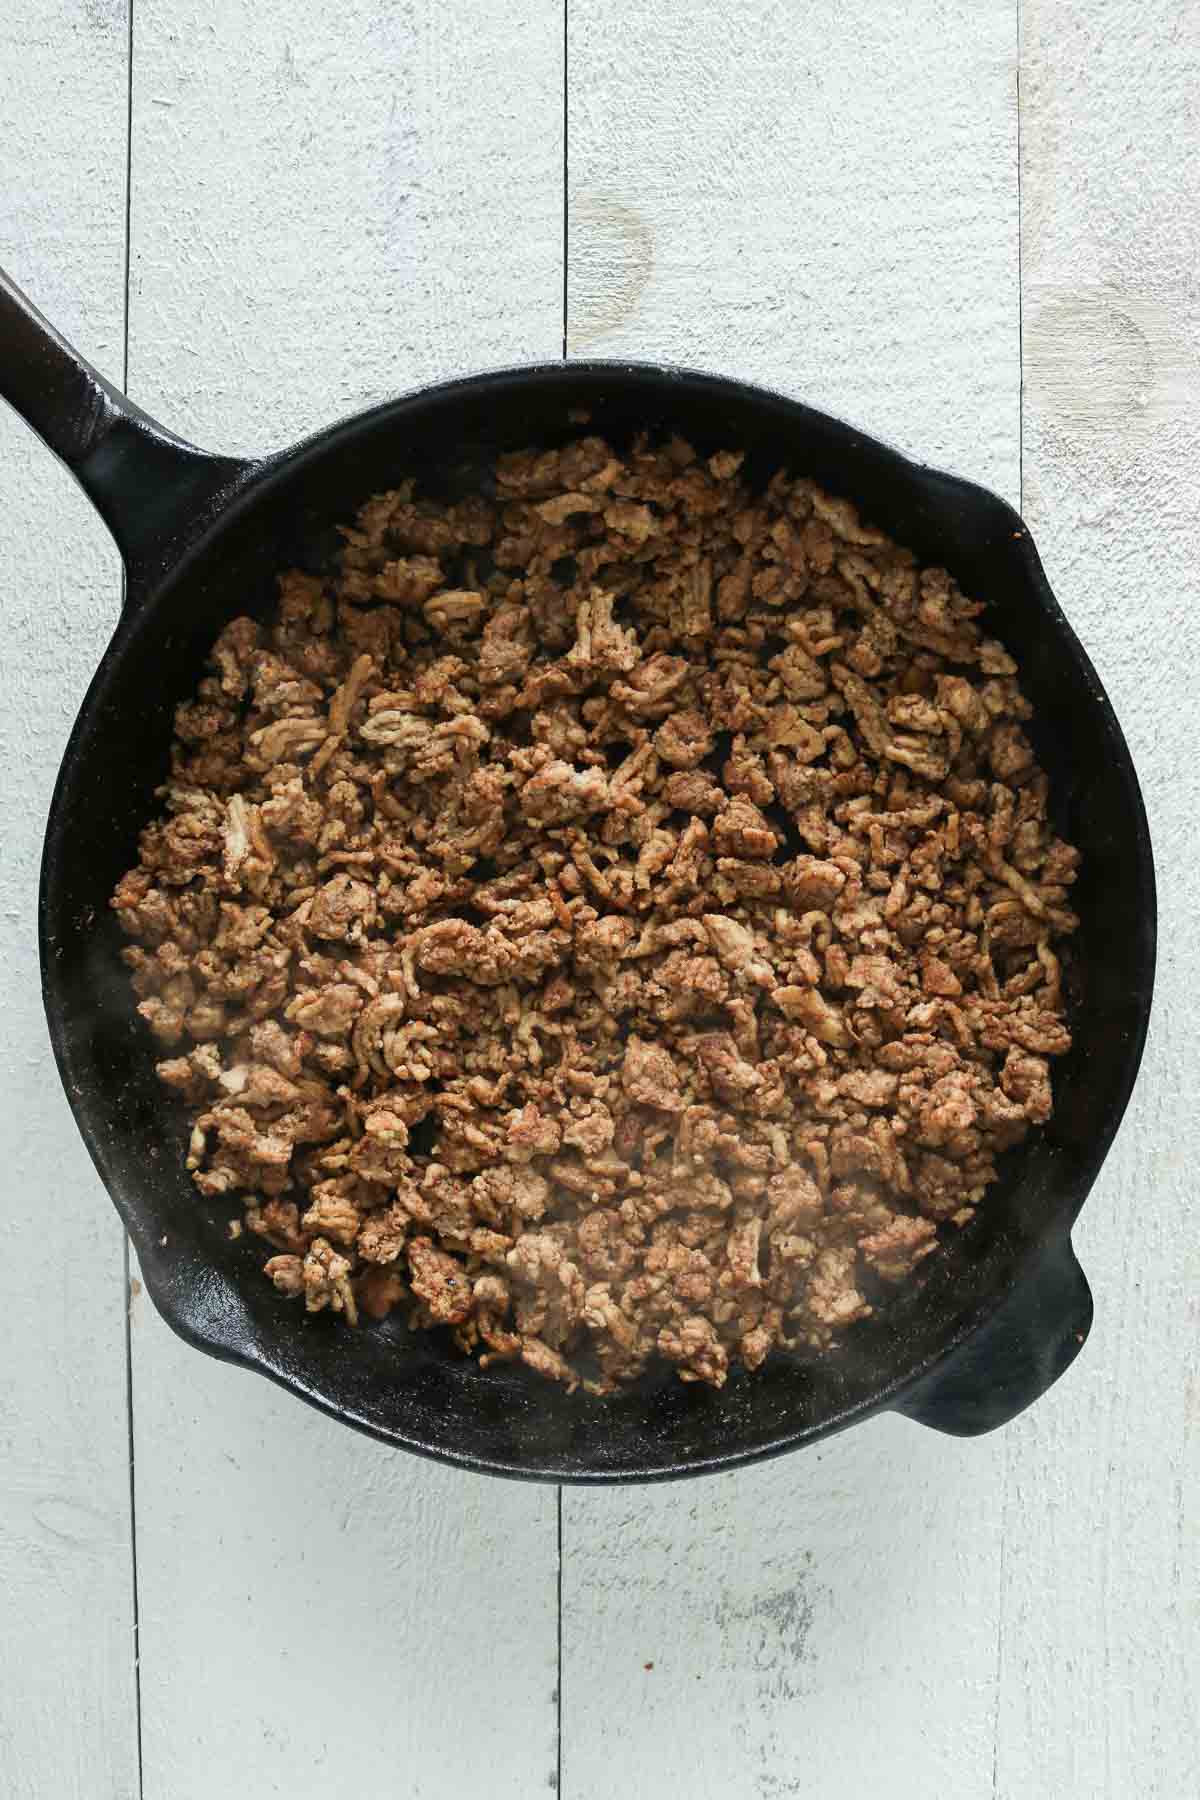 Cooked ground chicken in a skillet.